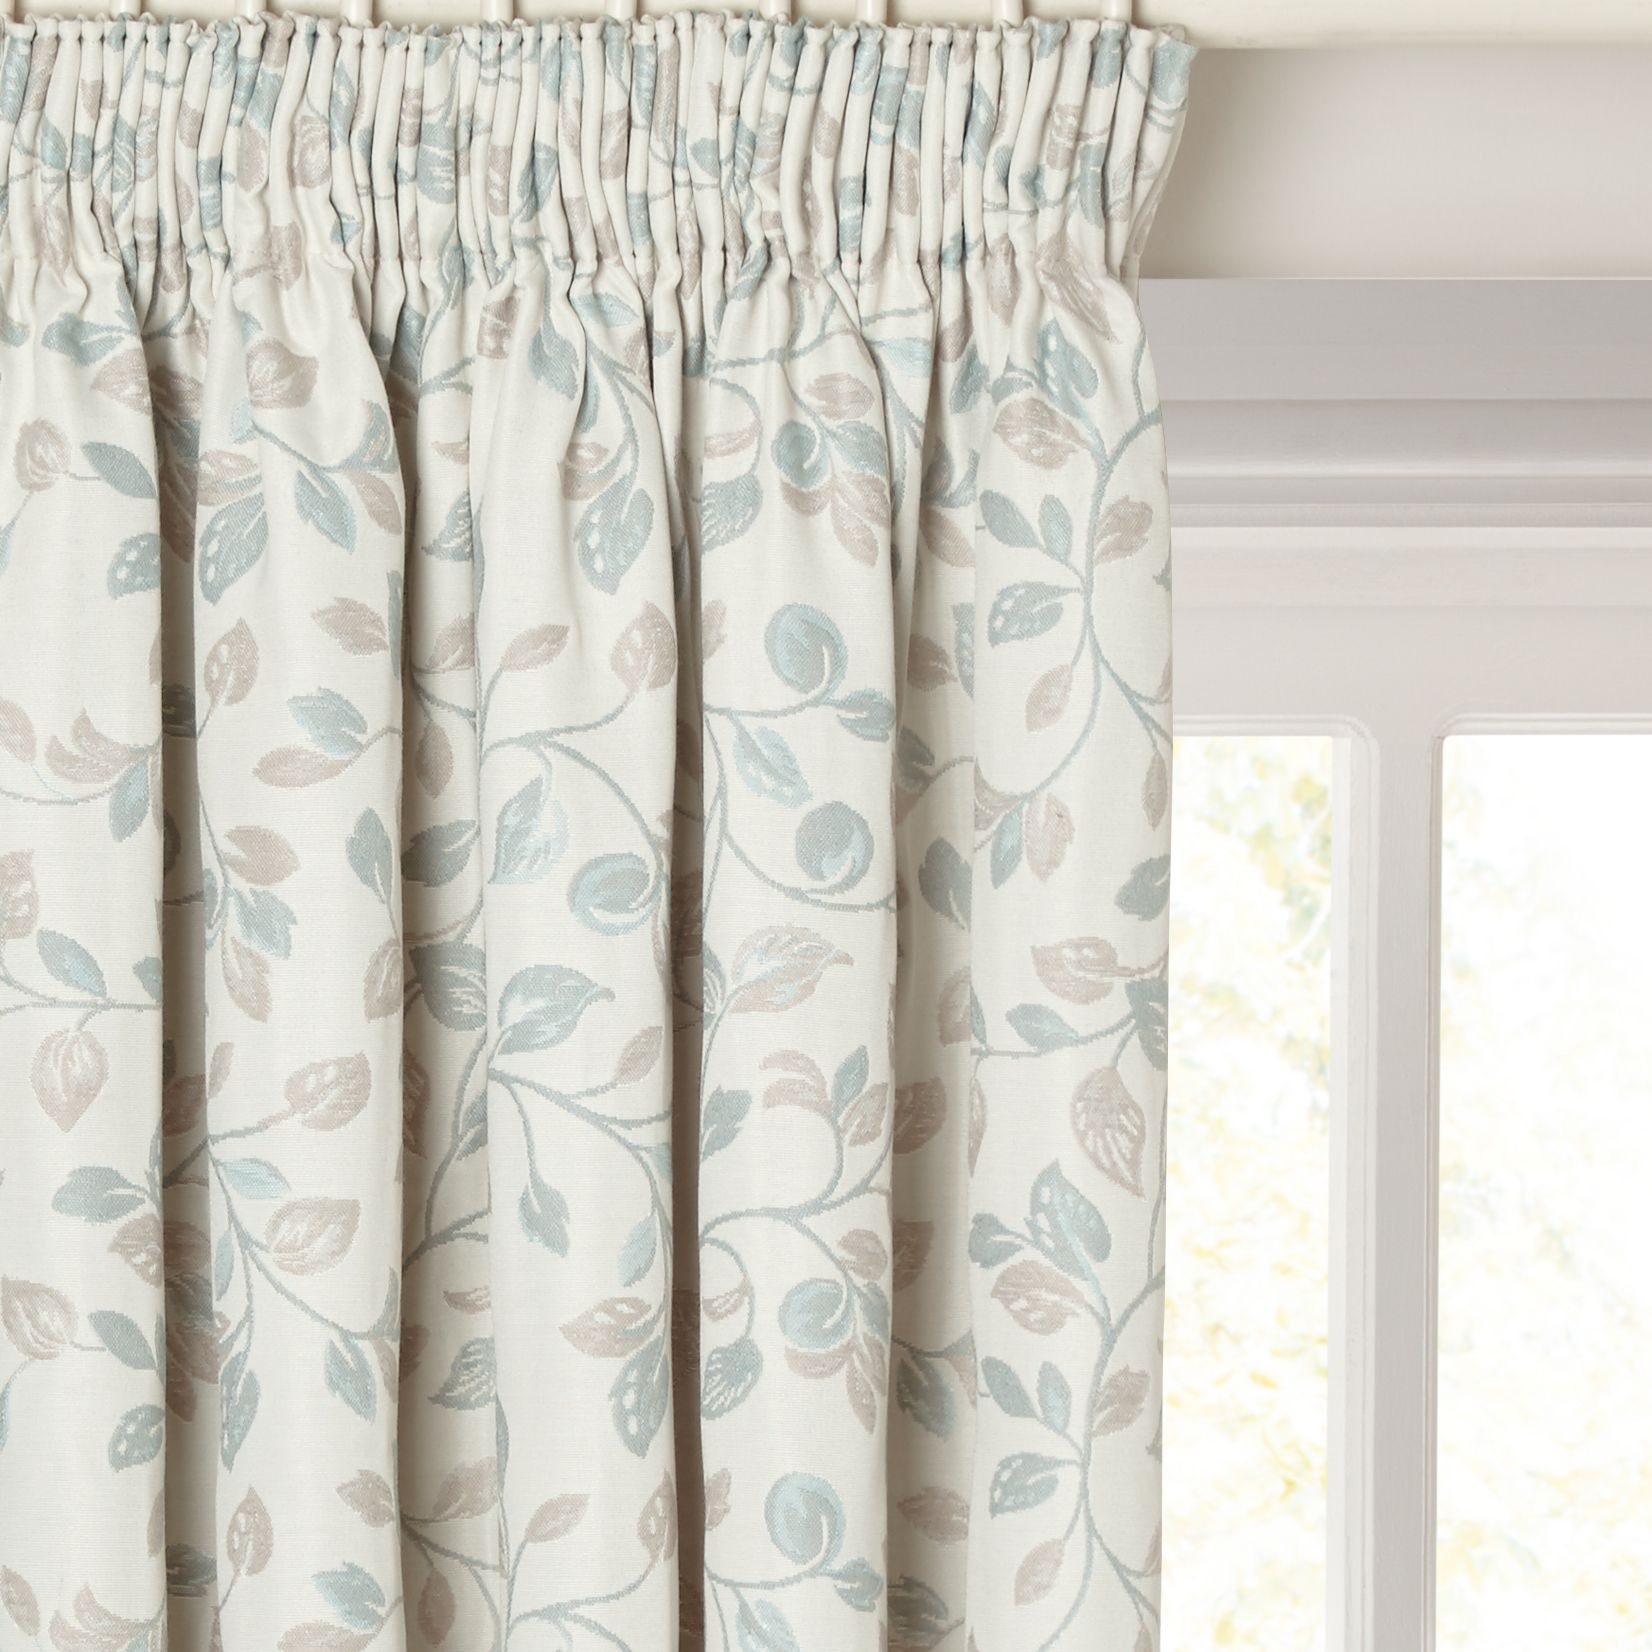 John Lewis & Partners Sherwood Pair Lined Pencil Pleat Curtains, Duck Egg